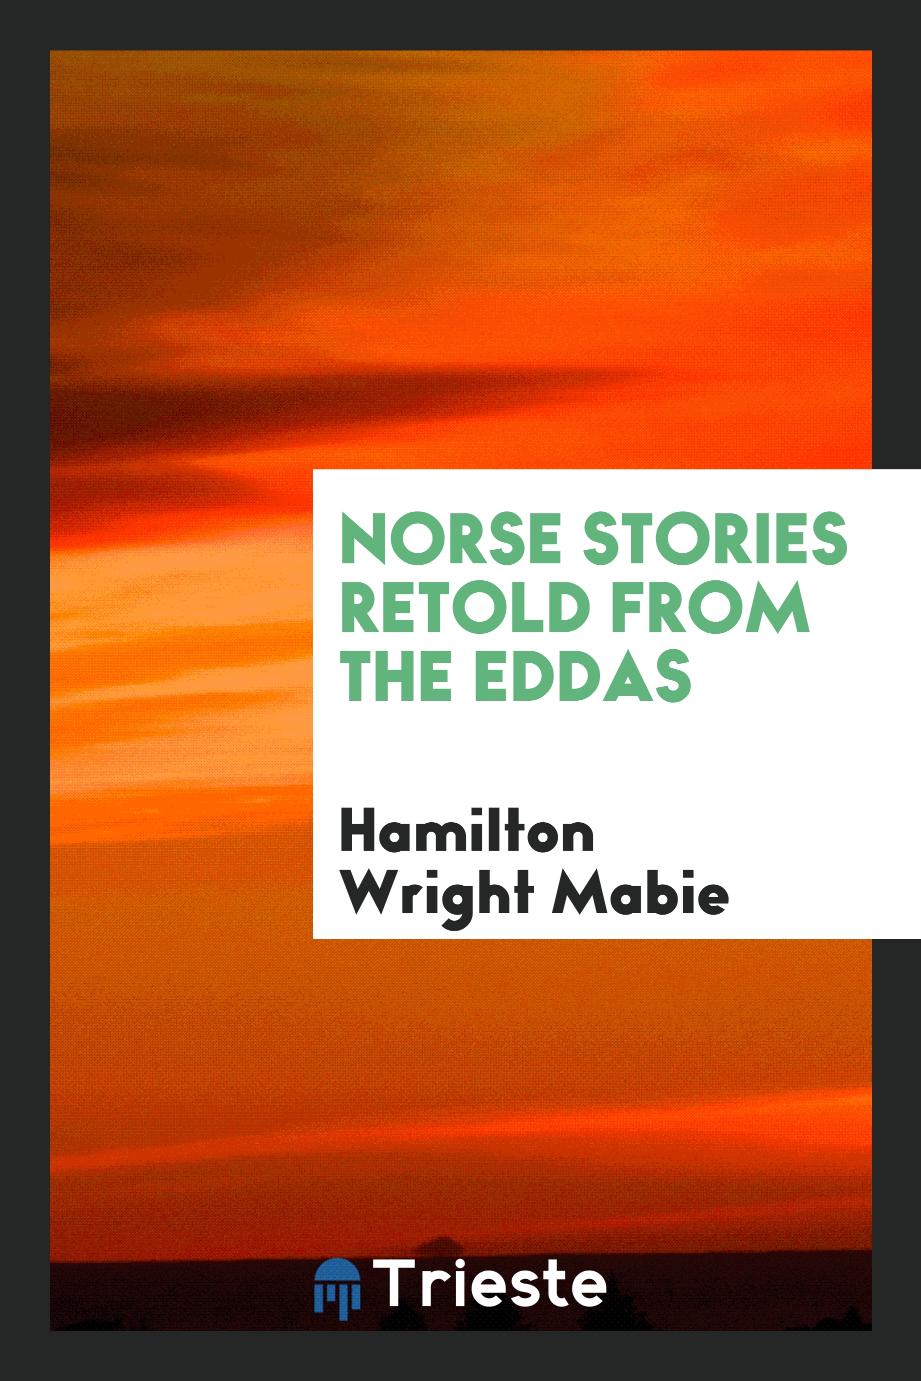 Norse stories retold from the Eddas